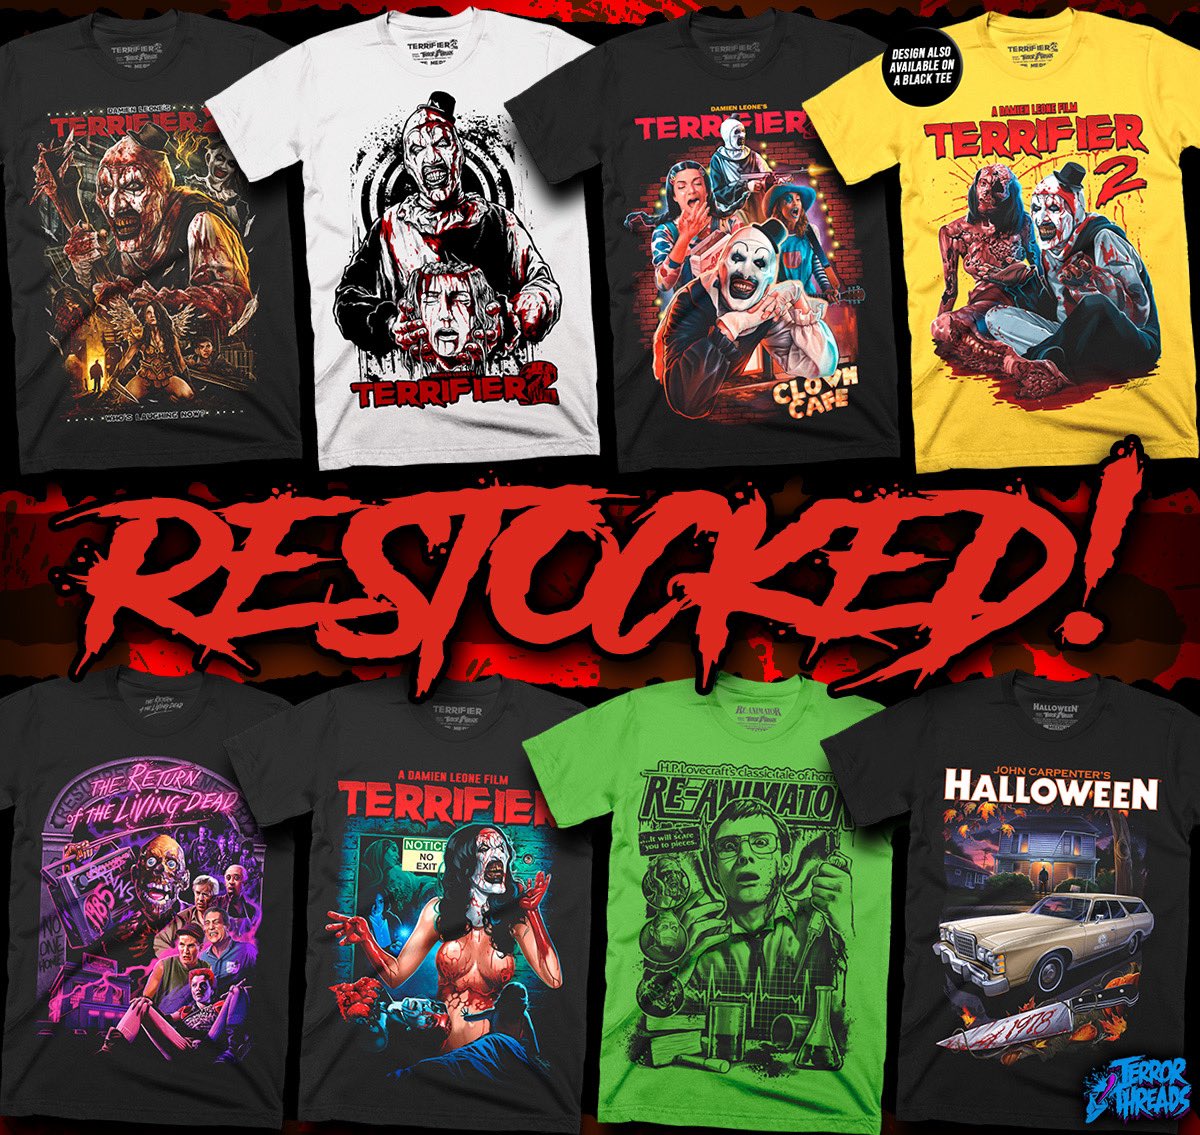 🔥 Attention! 🔥 We’ve just restocked NINE killer designs that you won’t want to miss out on. Act quickly because these tees will likely disappear quick! Grab yours before they’re gone for good! Click the link in our profile or shop, TERRORTHREADS.COM💀